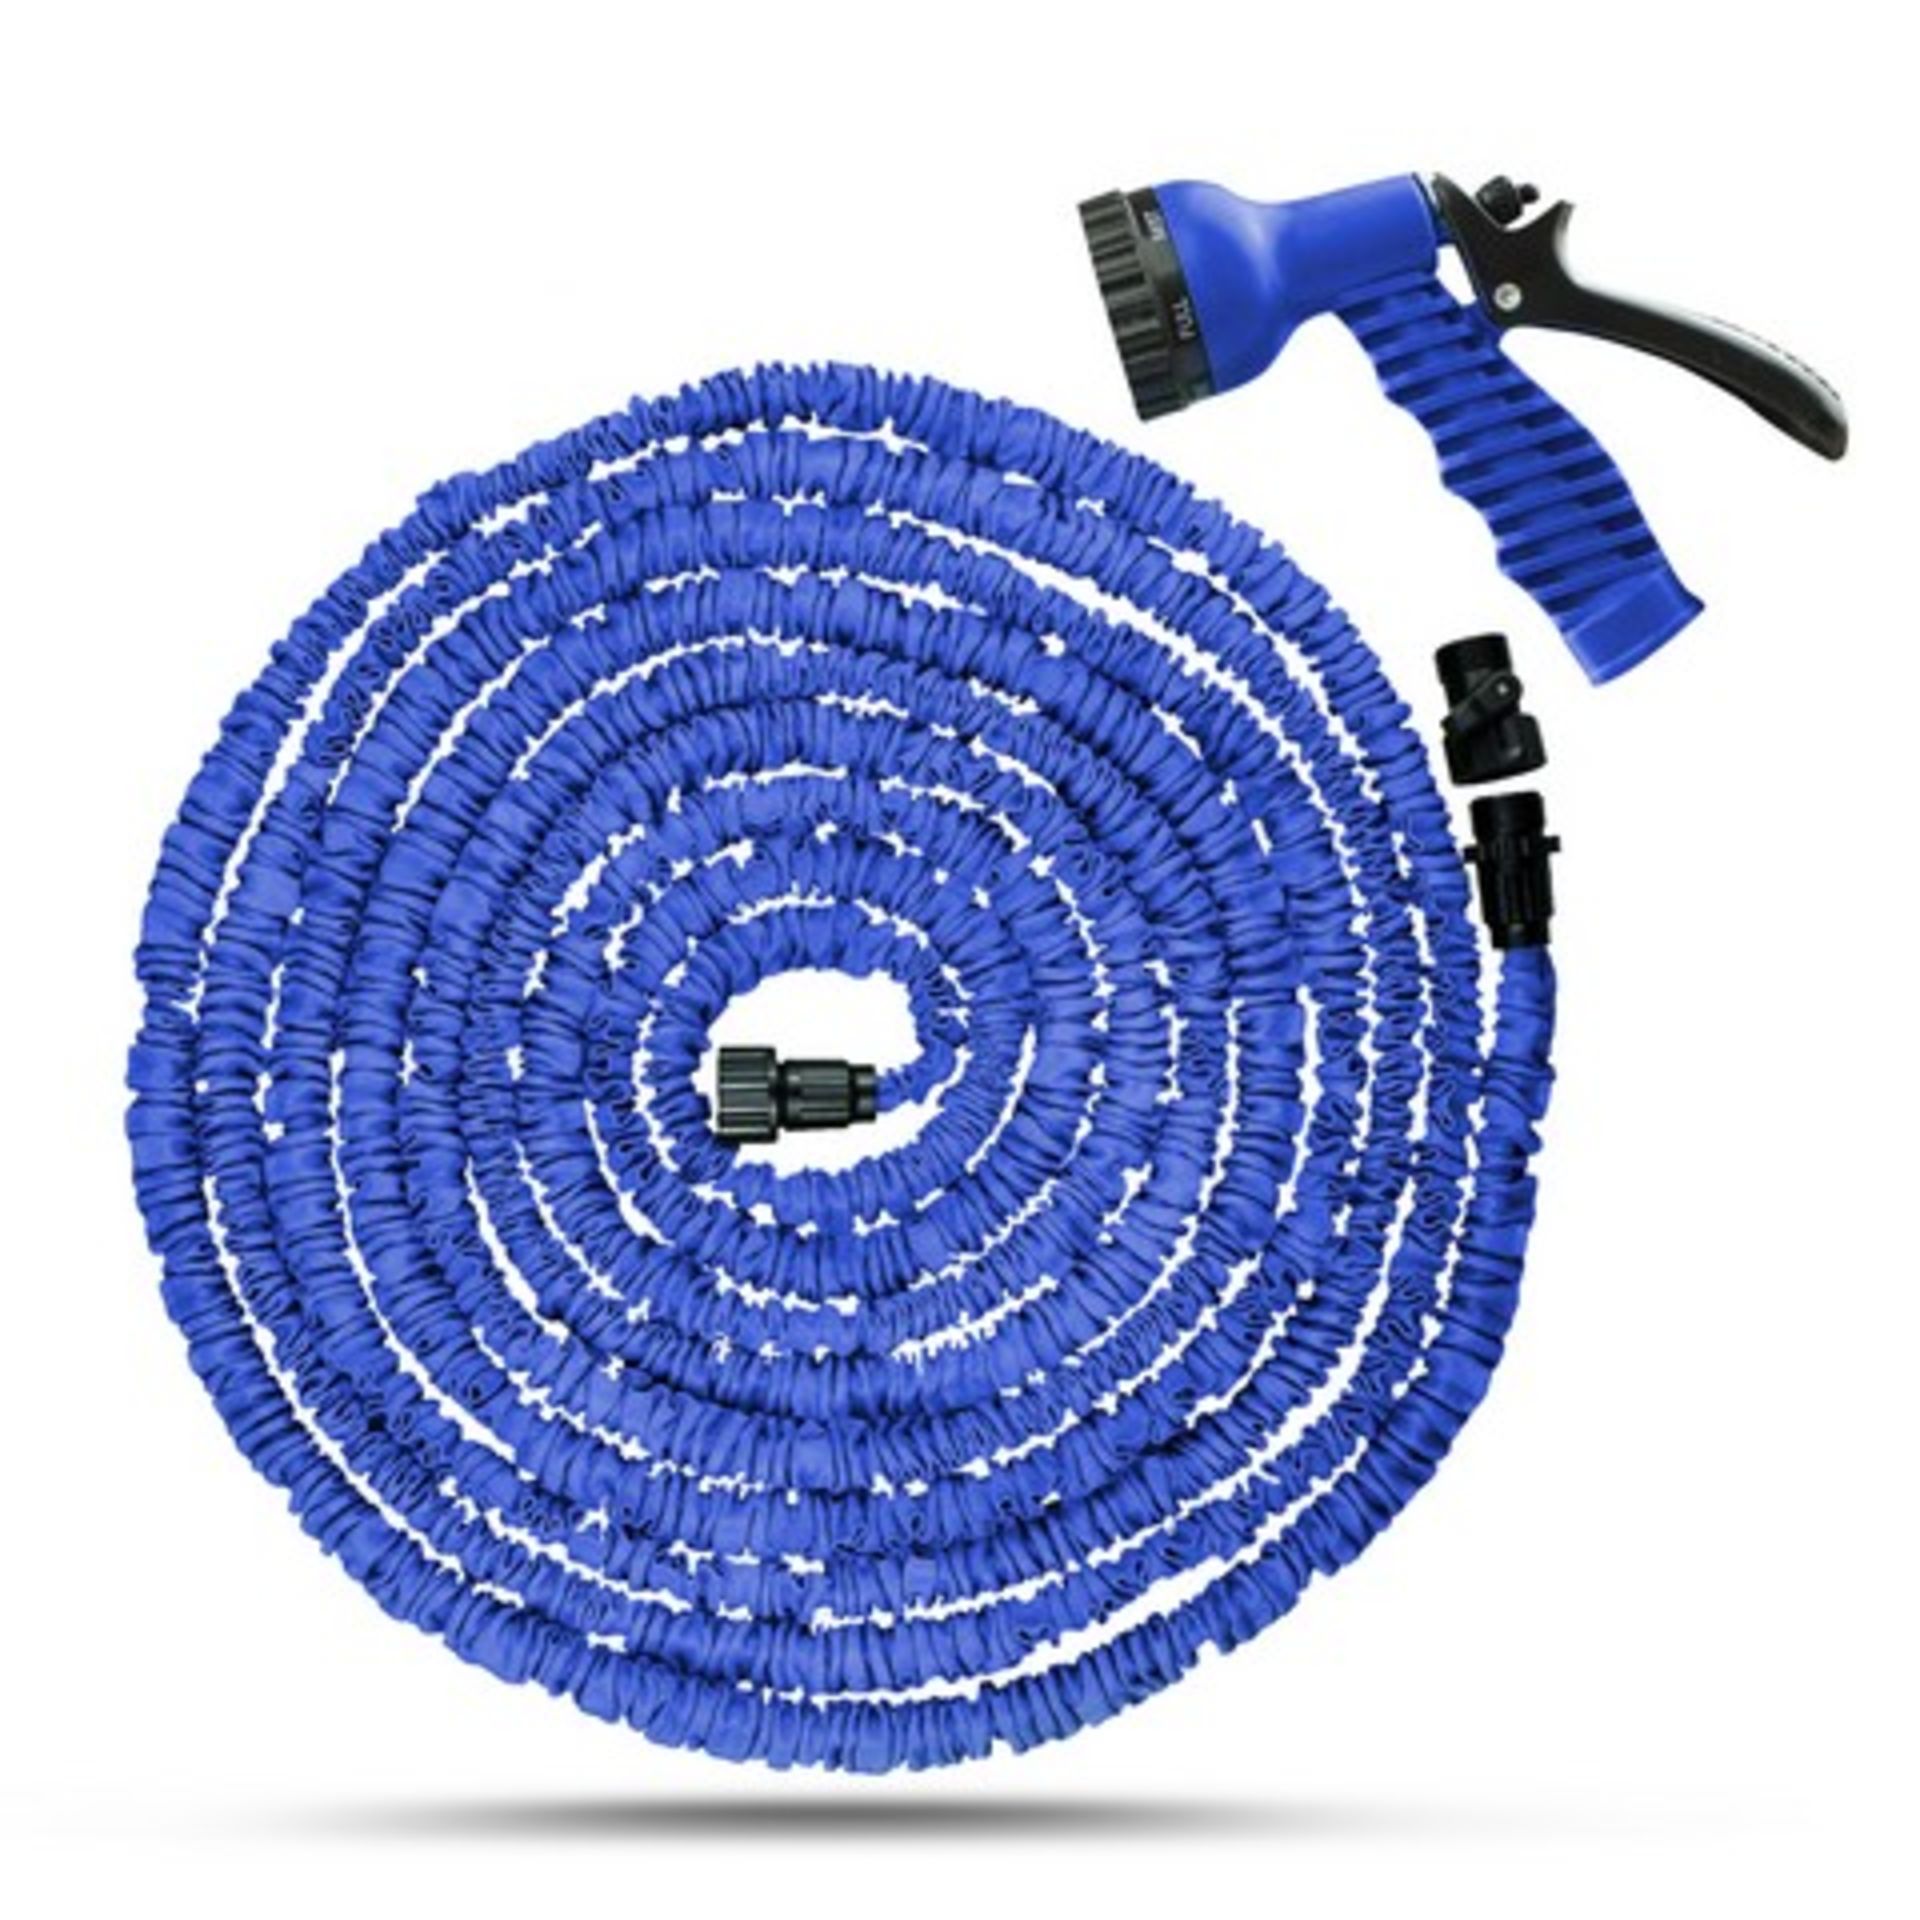 V Brand New 50 Foot Expandable Hose - Automatically Expands - Lightweight - Easily Stored Amazon